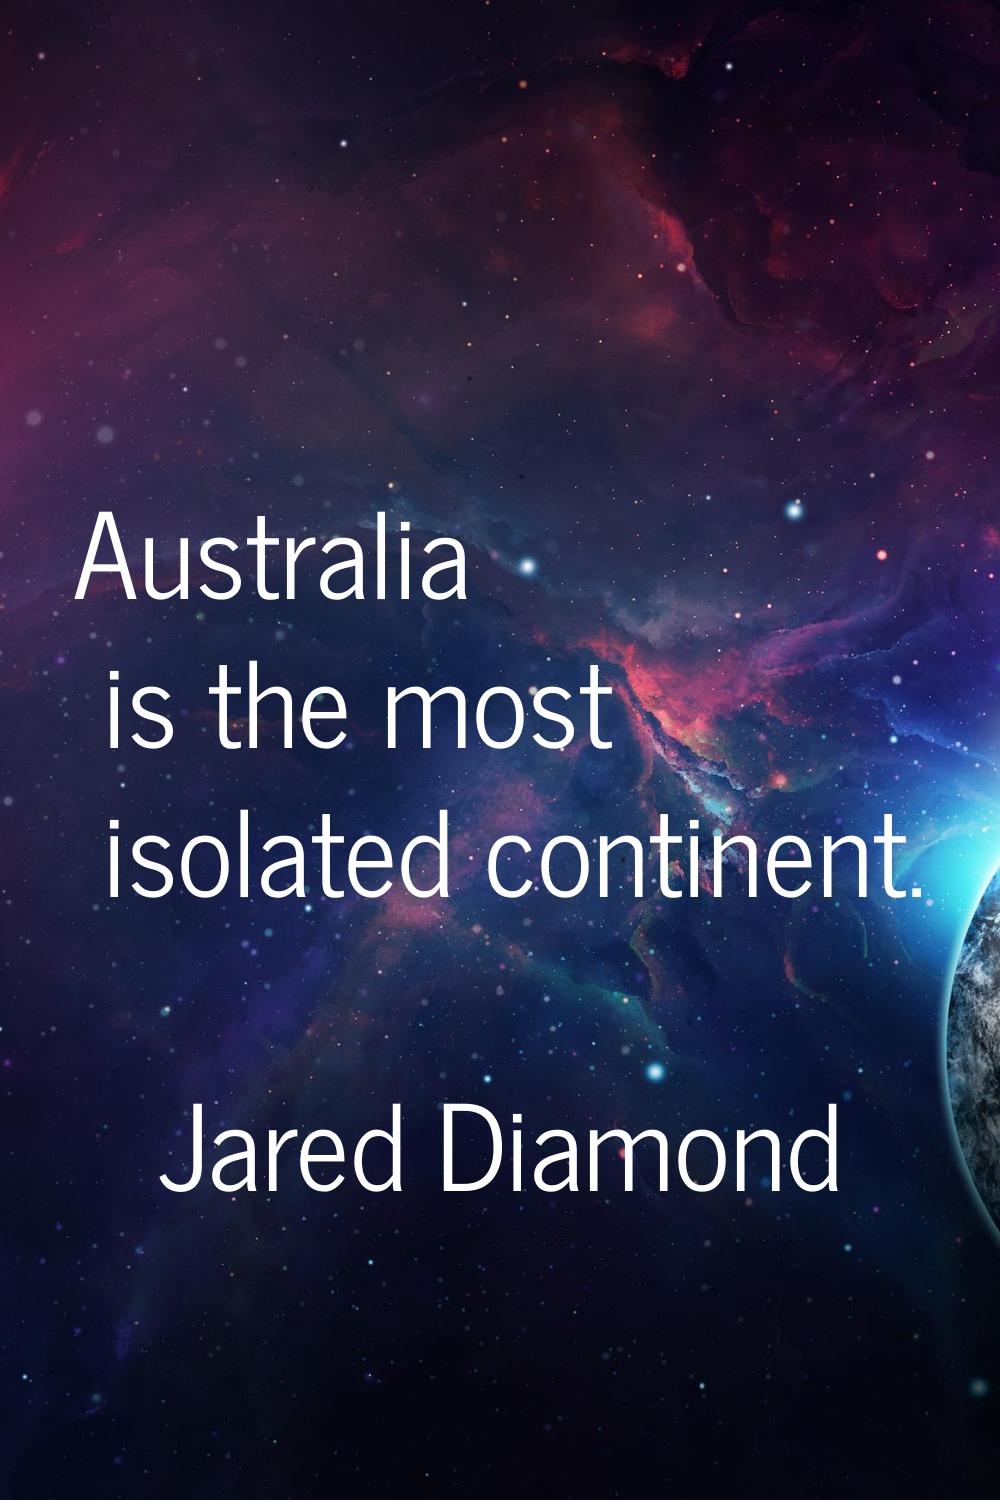 Australia is the most isolated continent.